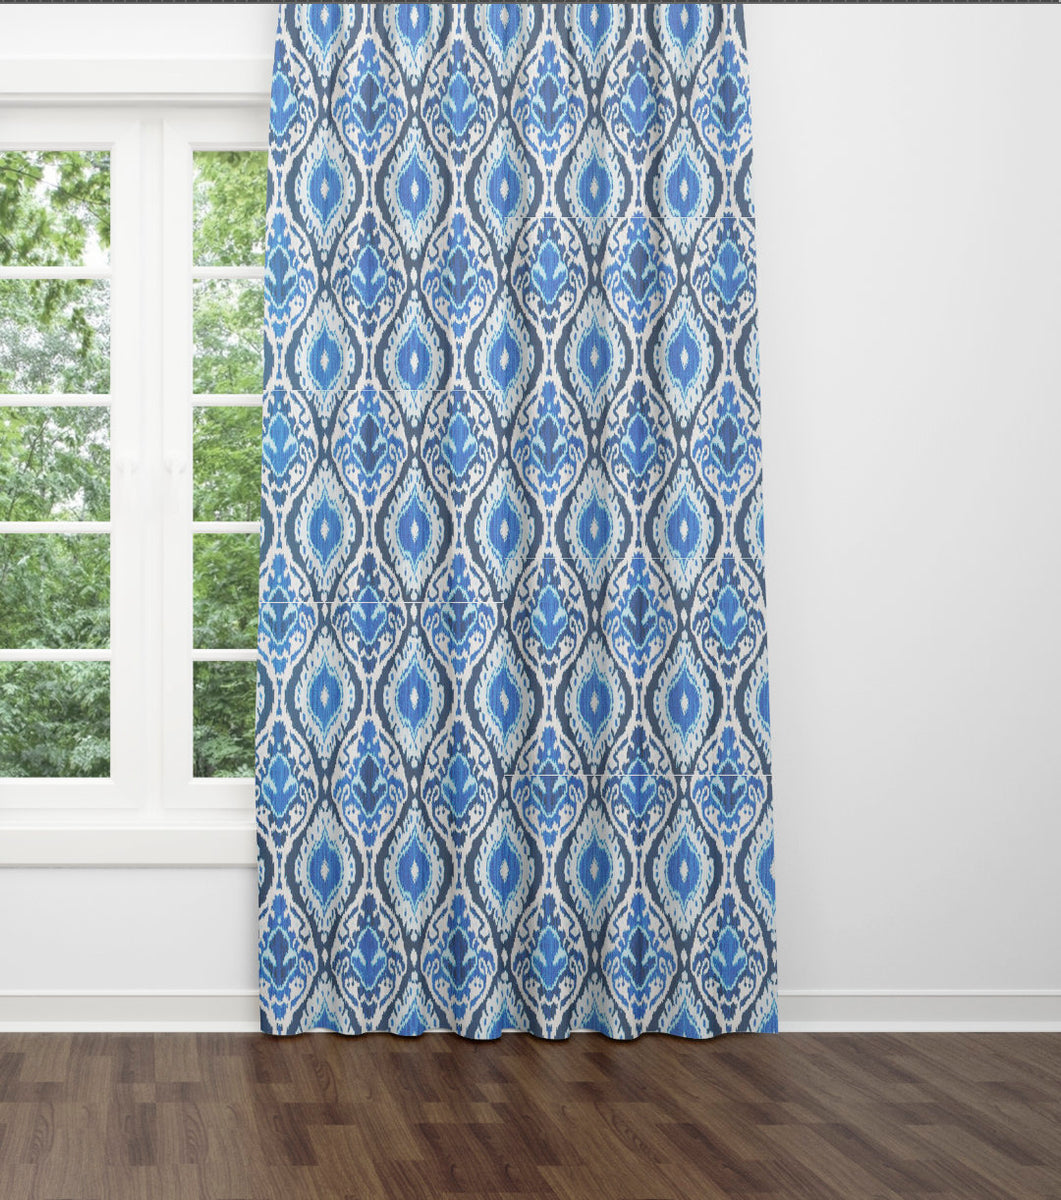 Blue Ikat Curtains navy ikat curtains dining room curtains blue ethnic ...